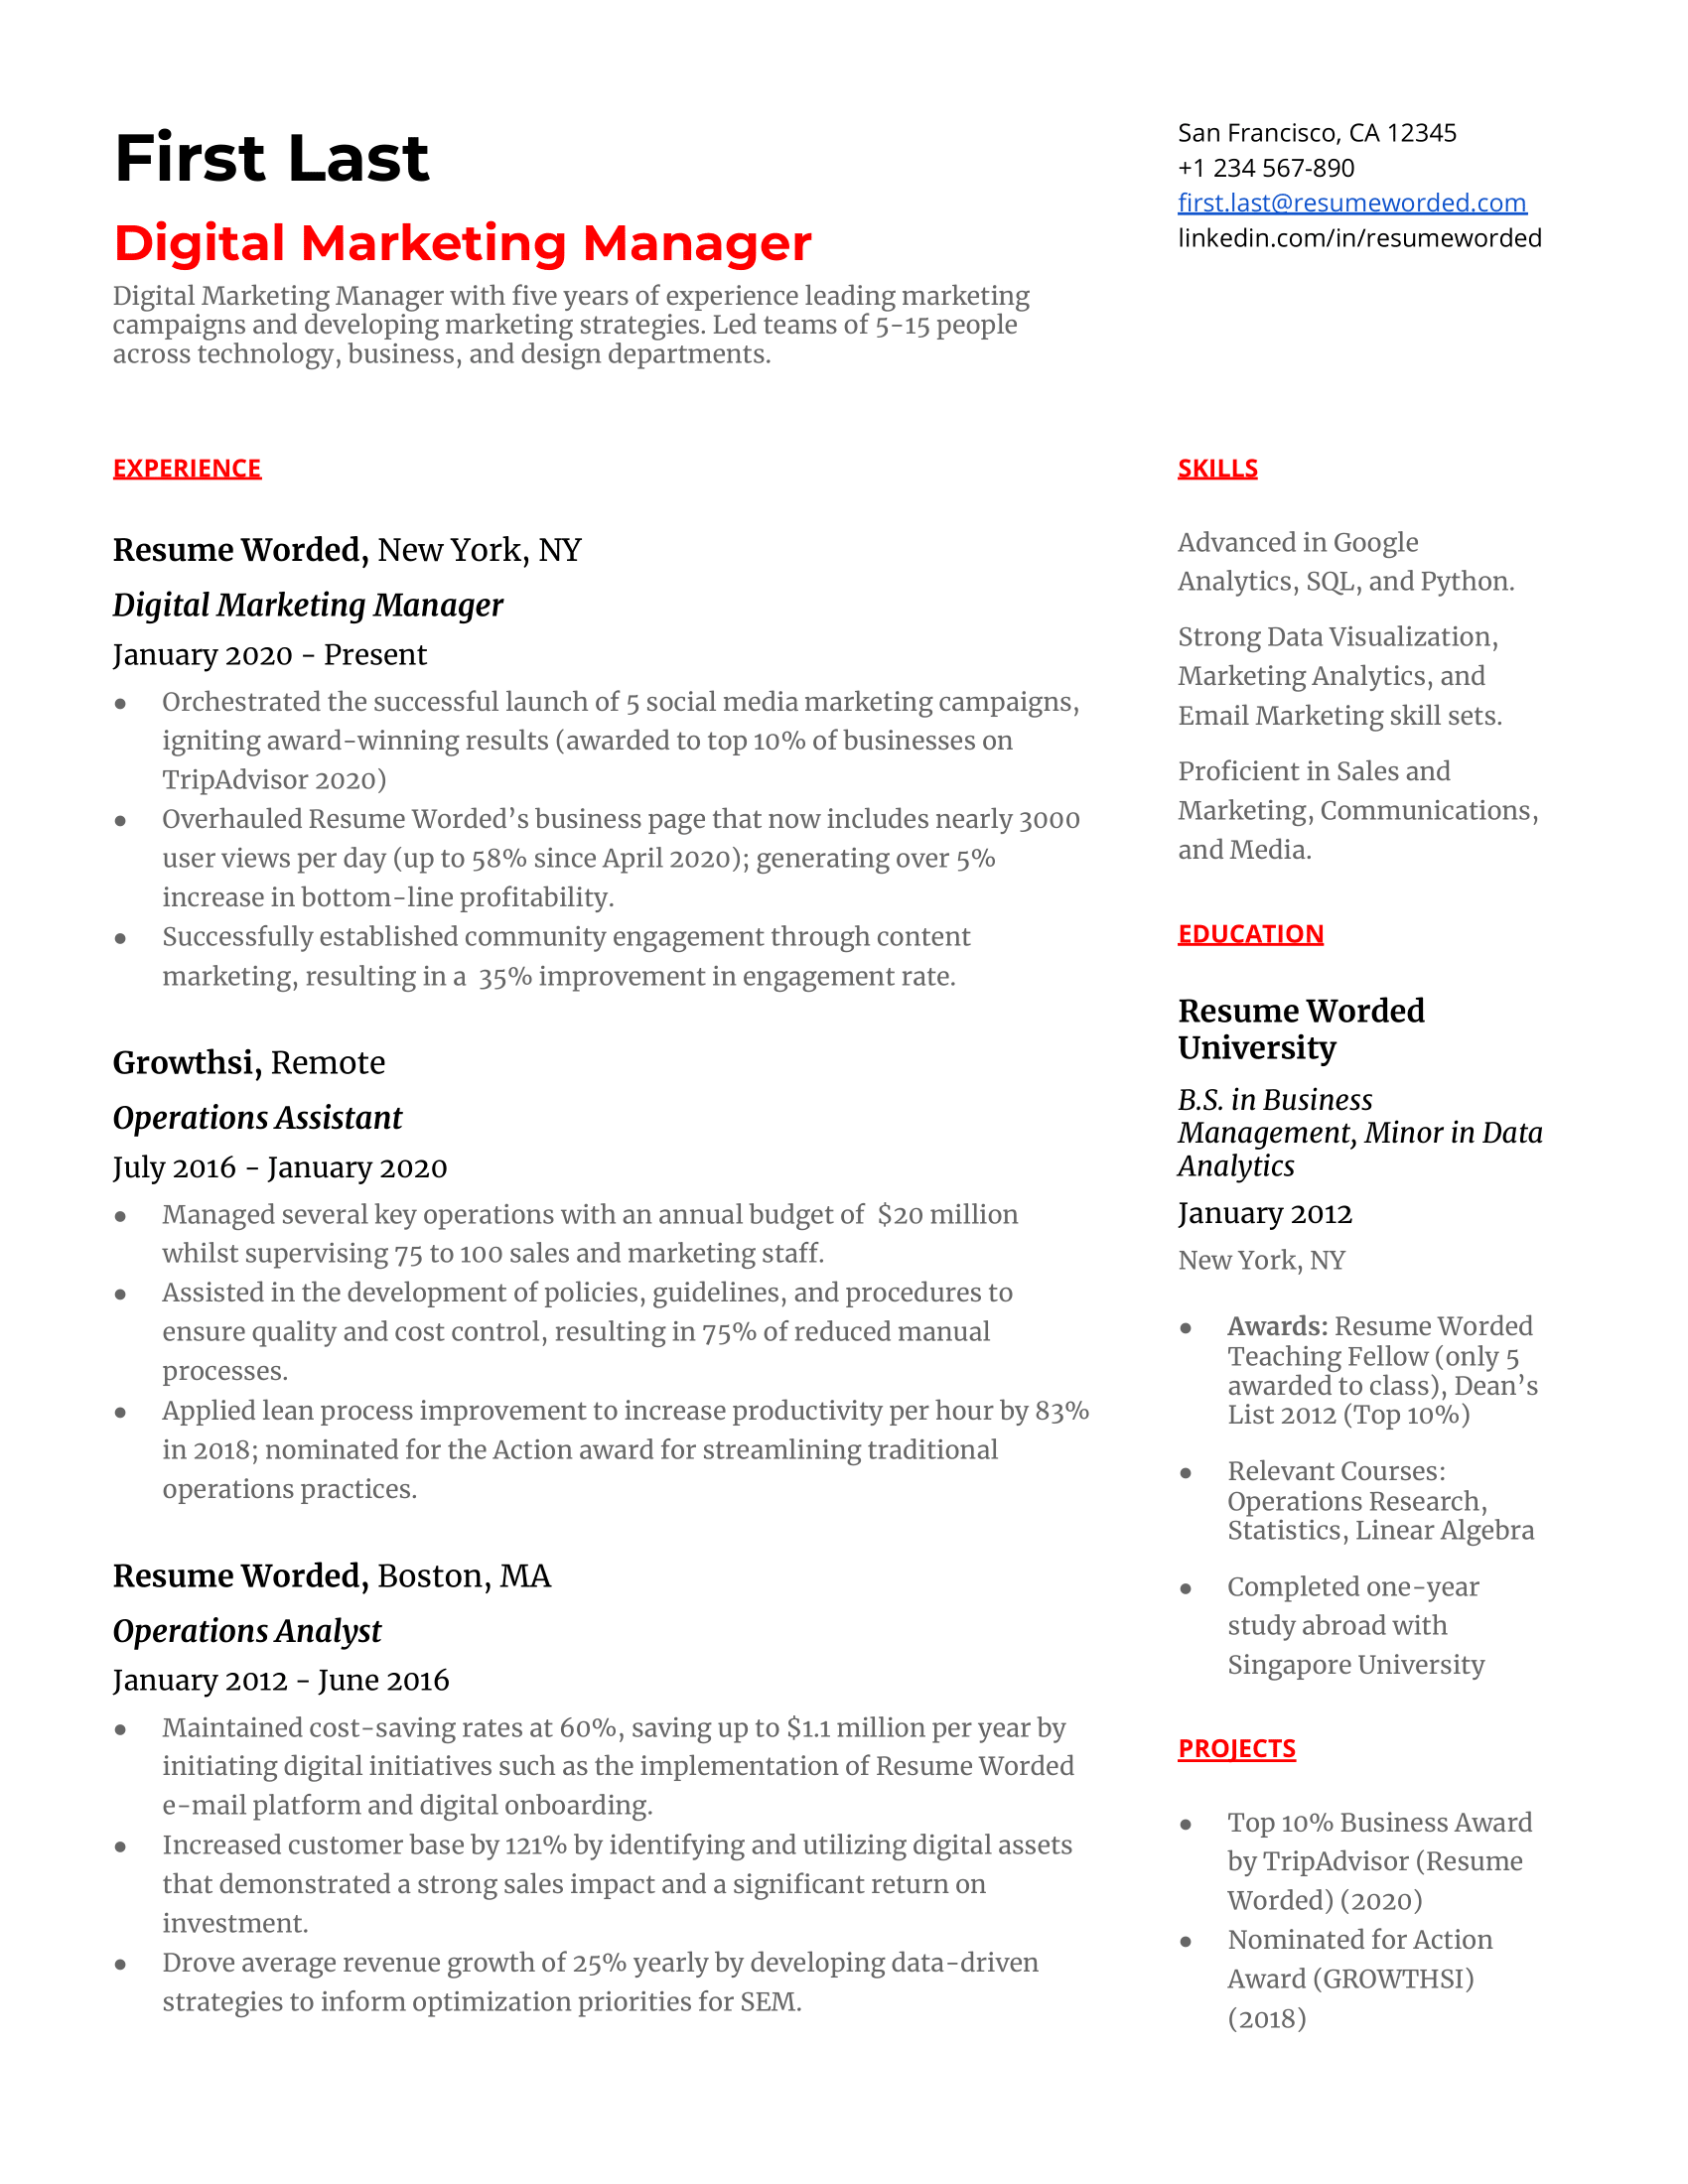 Digital Marketing Manager Resume Template + Example